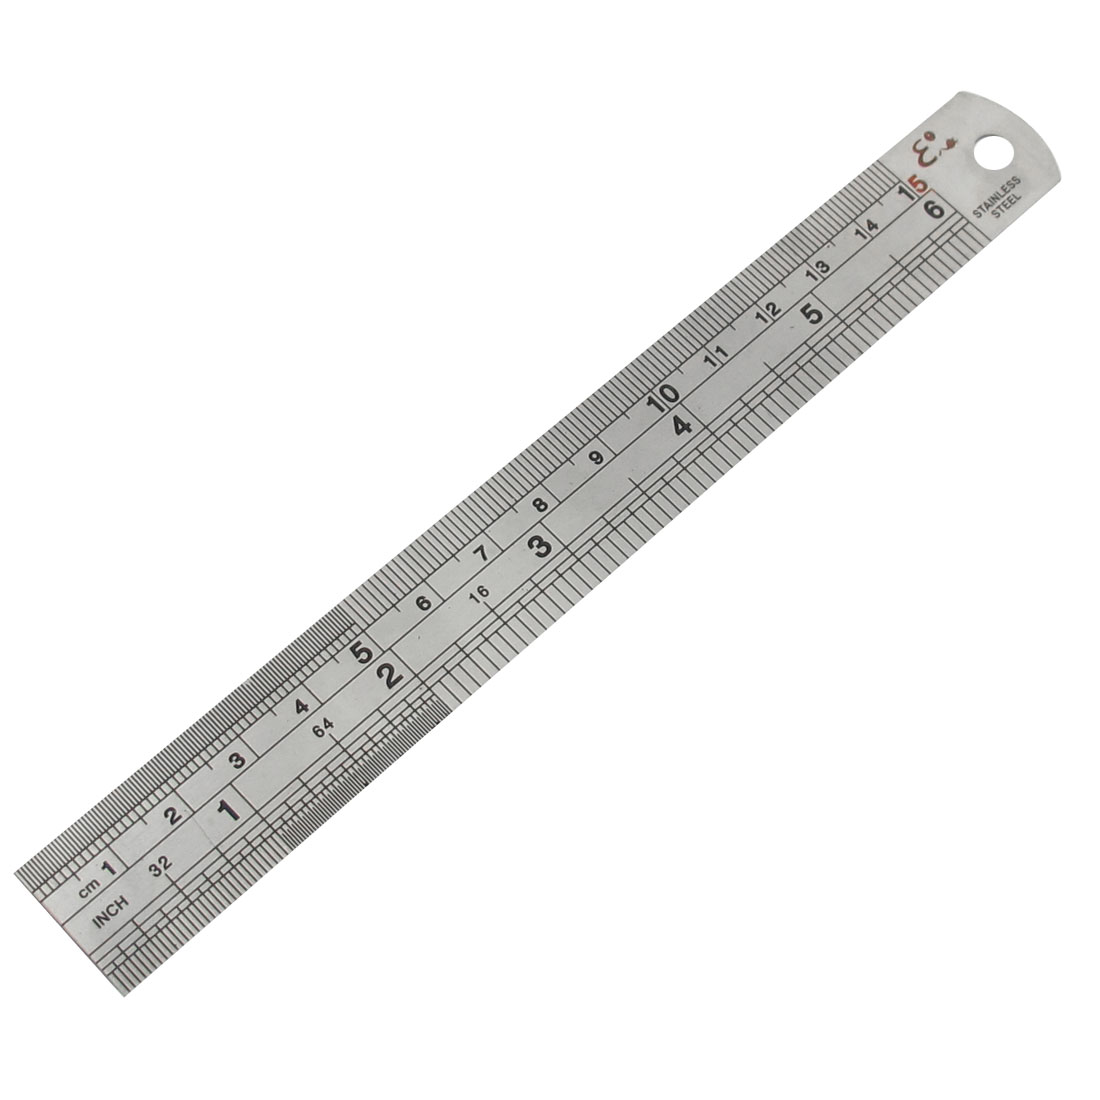 15 Inch Ruler Clipart